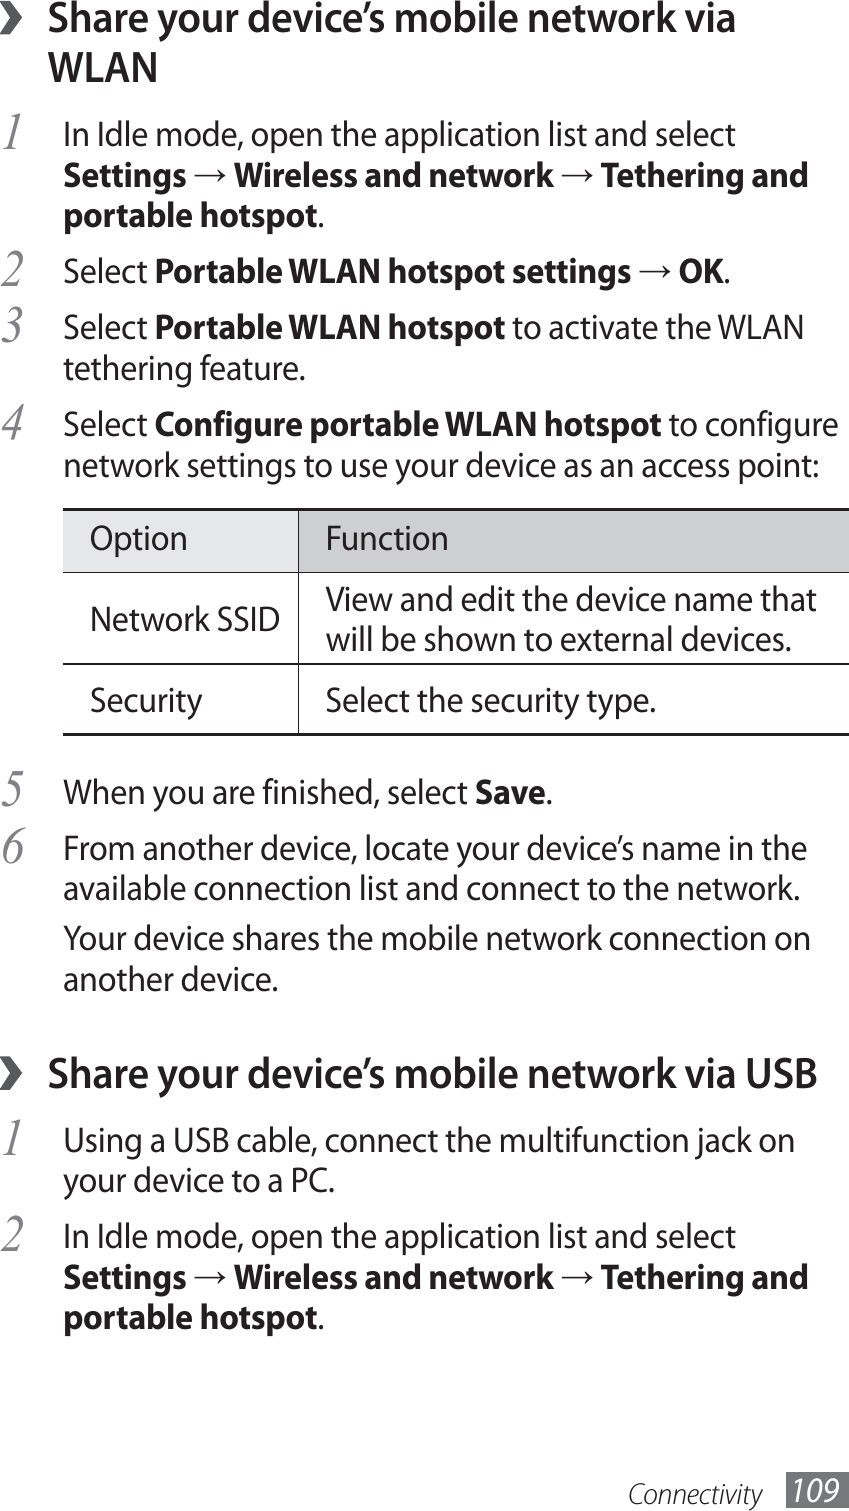 Connectivity 109 ›Share your device’s mobile network via WLANIn Idle mode, open the application list and select 1 Settings → Wireless and network → Tethering and portable hotspot.Select 2 Portable WLAN hotspot settings → OK.Select 3 Portable WLAN hotspot to activate the WLAN tethering feature.Select 4 Configure portable WLAN hotspot to configure network settings to use your device as an access point:Option FunctionNetwork SSID View and edit the device name that will be shown to external devices.Security Select the security type.When you are finished, select 5 Save.From another device, locate your device’s name in the 6 available connection list and connect to the network.Your device shares the mobile network connection on another device. ›Share your device’s mobile network via USBUsing a USB cable, connect the multifunction jack on 1 your device to a PC.In Idle mode, open the application list and select 2 Settings → Wireless and network → Tethering and portable hotspot.